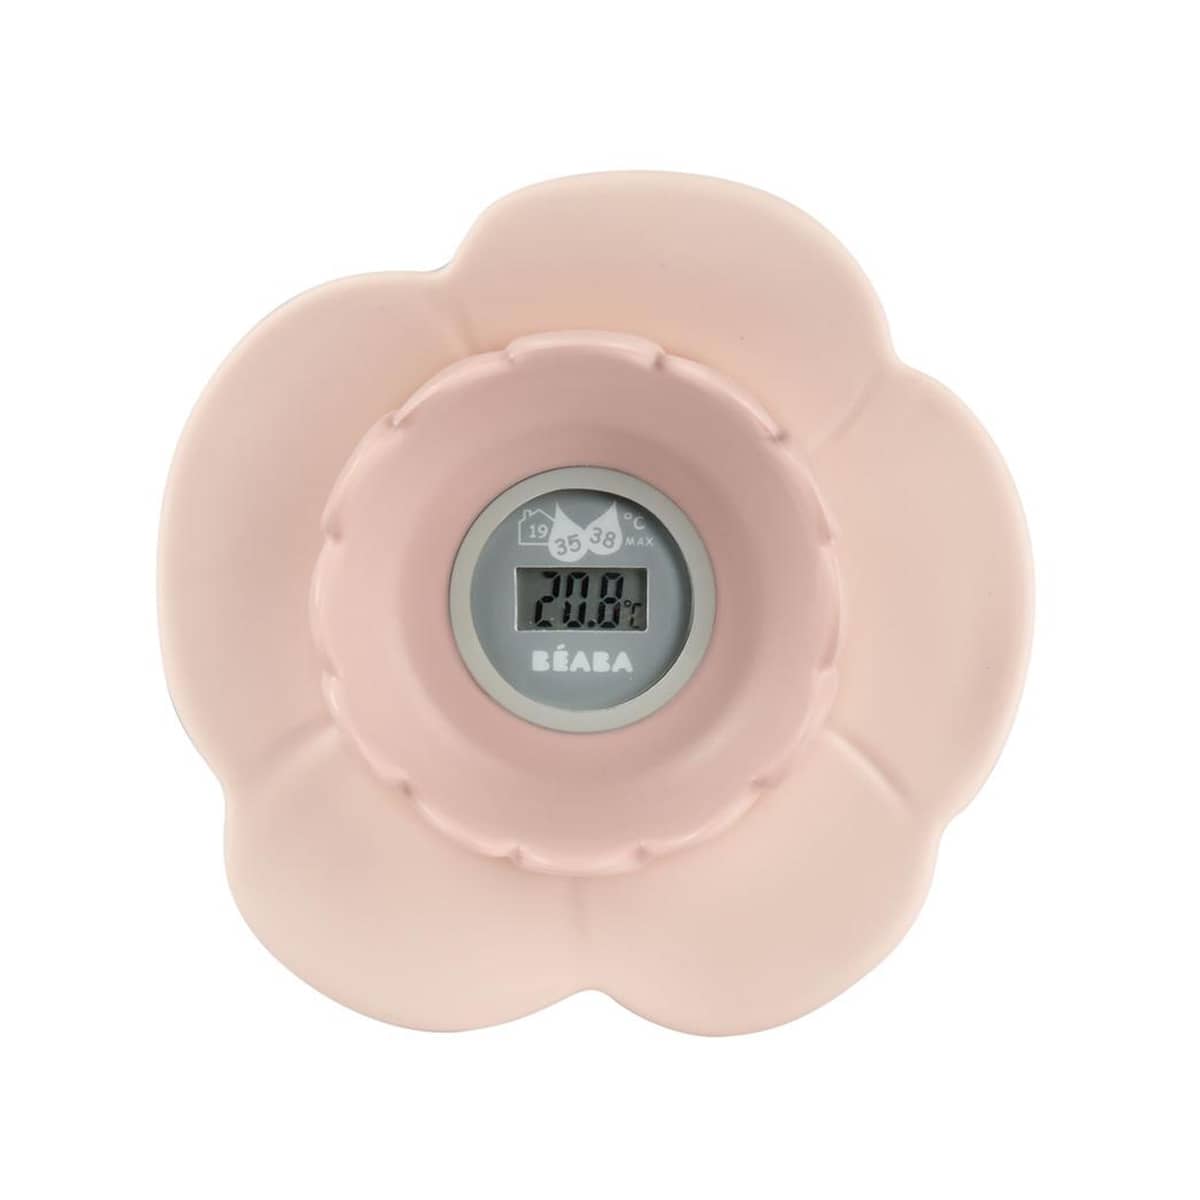 Beaba Lotus Digital Bath and Room Thermometer - Old Pink